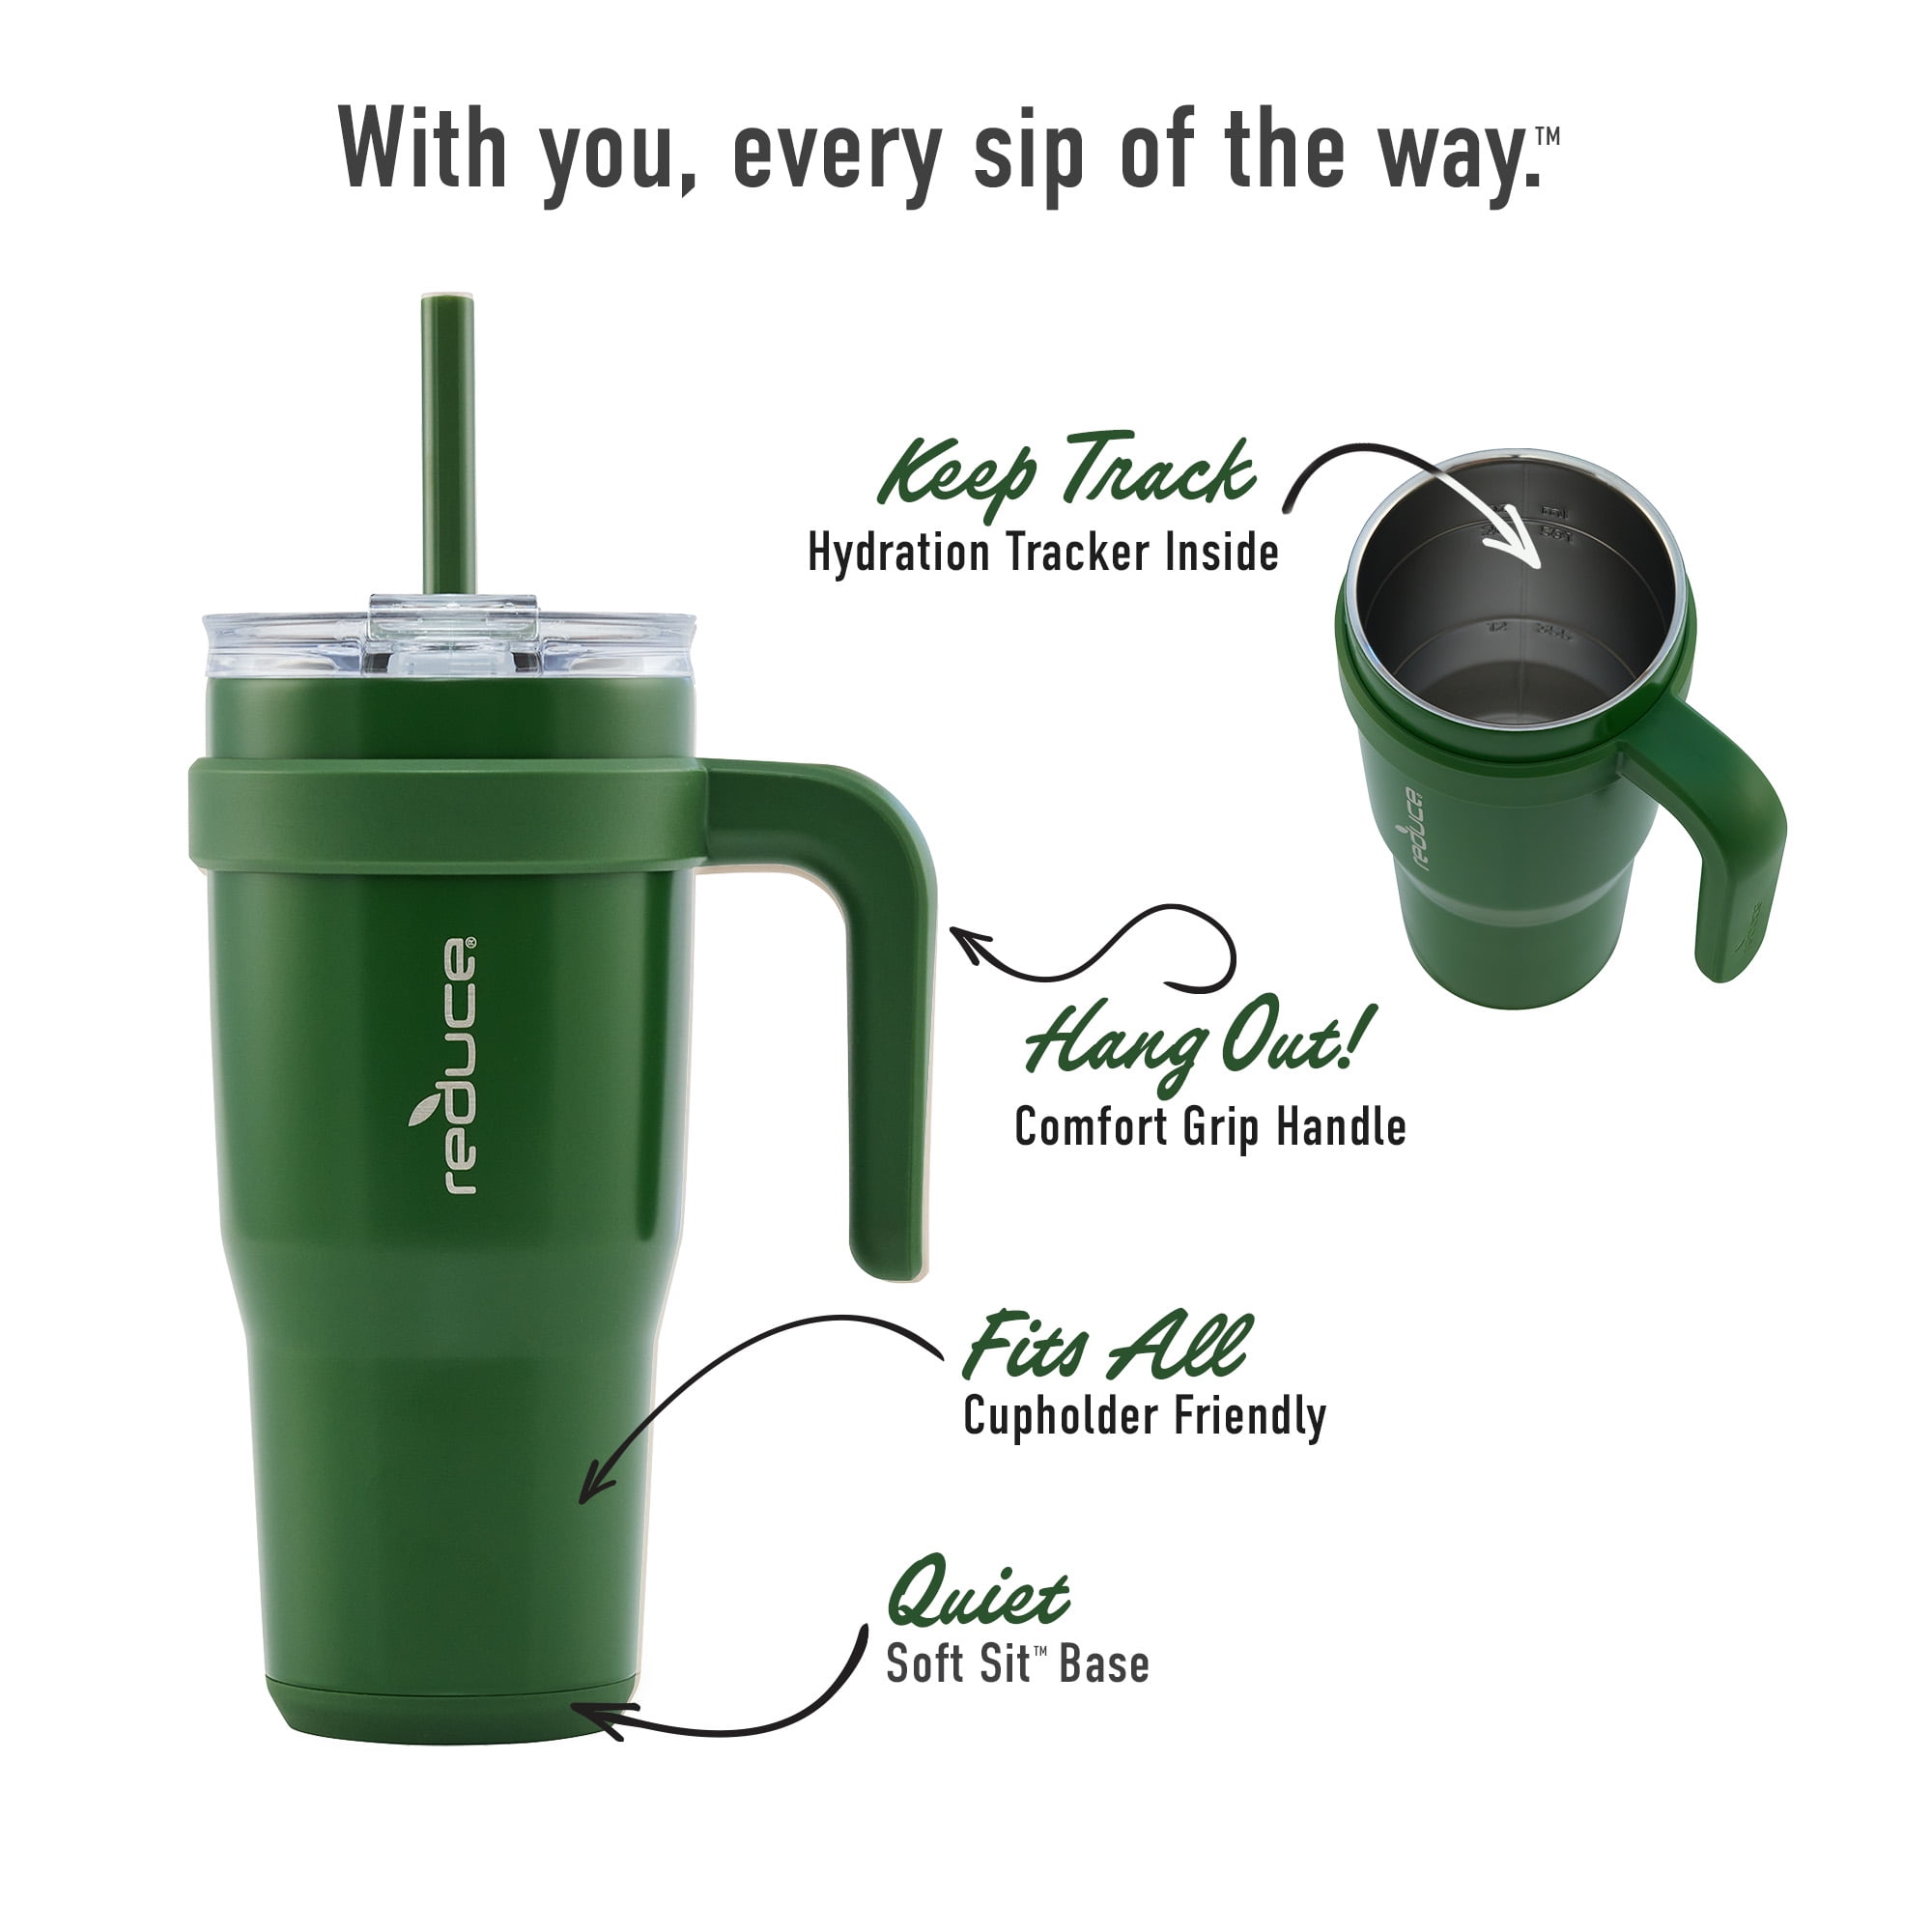 Reduce Vacuum Insulated Stainless Steel Cold1 24 fl oz. Tumbler Mug with 3  Way Lid, Straw, & Handle - White Opaque Gloss